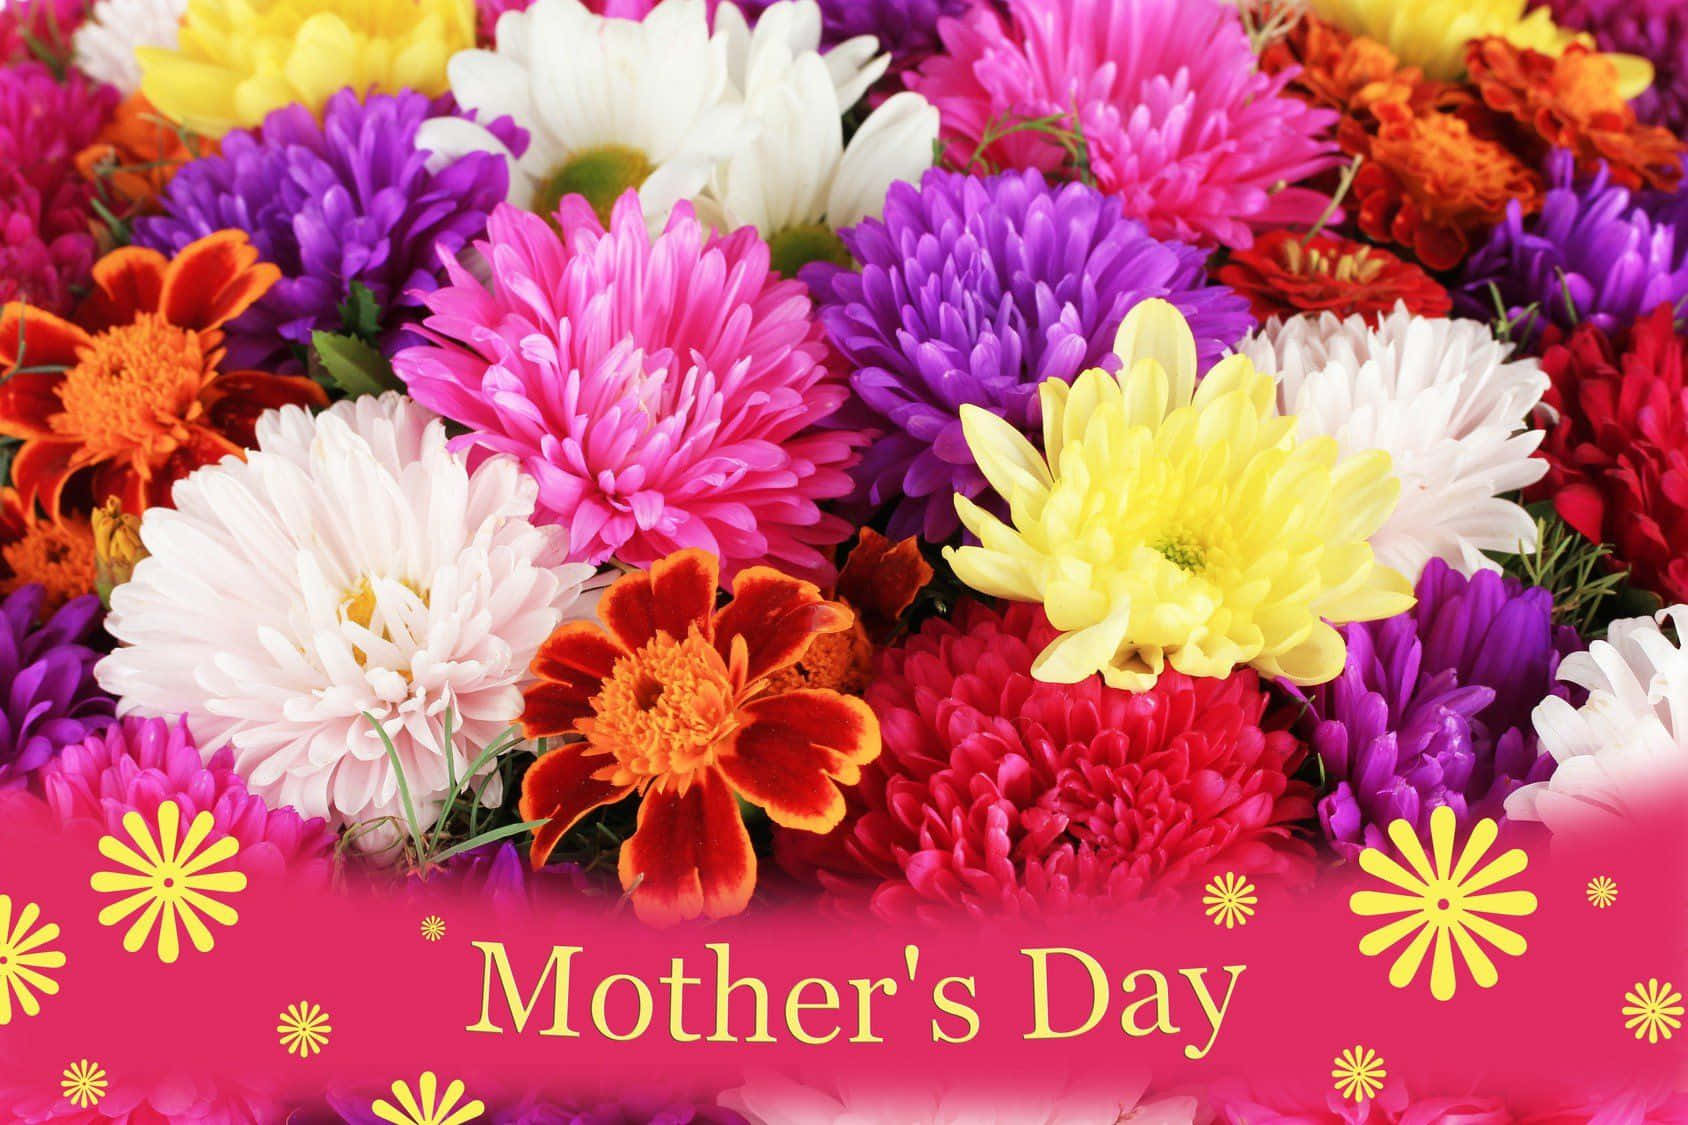 A Colorful Bouquet Of Flowers With The Words Mother's Day